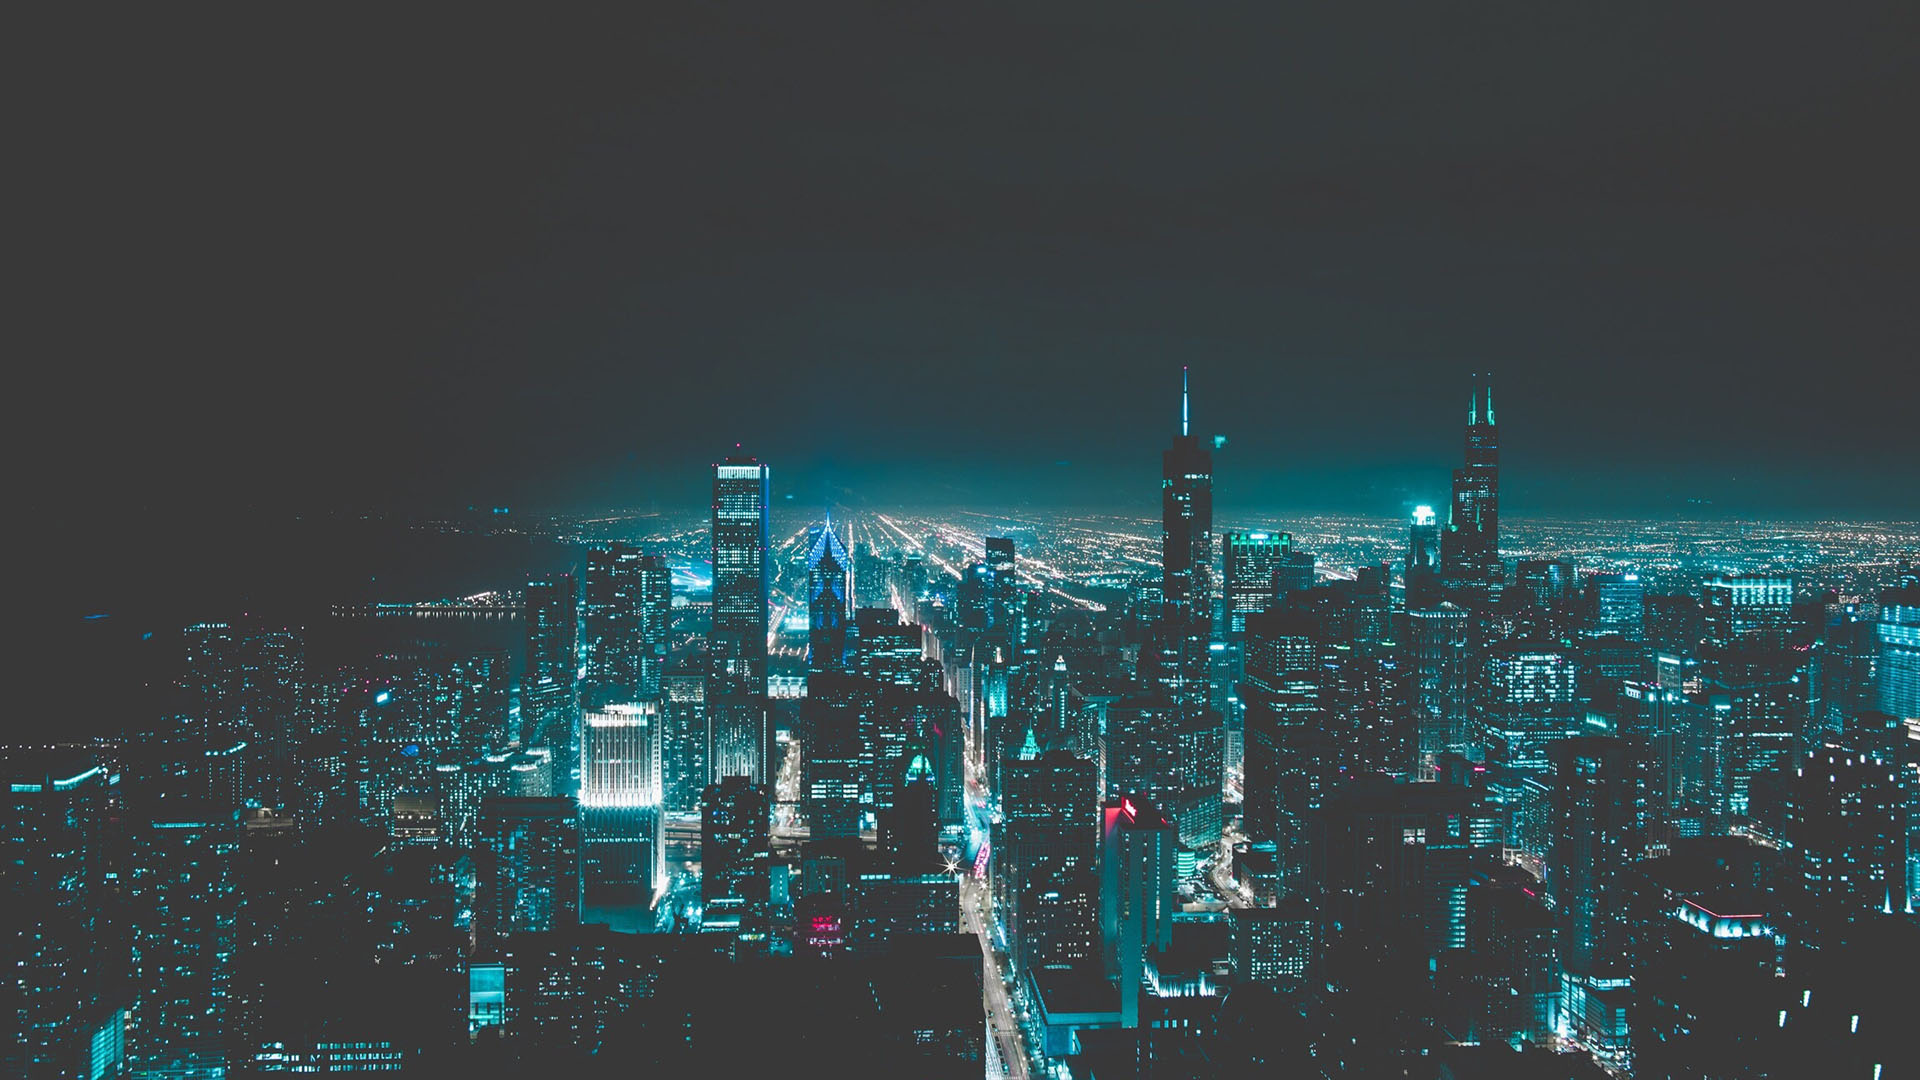 New York City skyline at night with blue-tinted filter